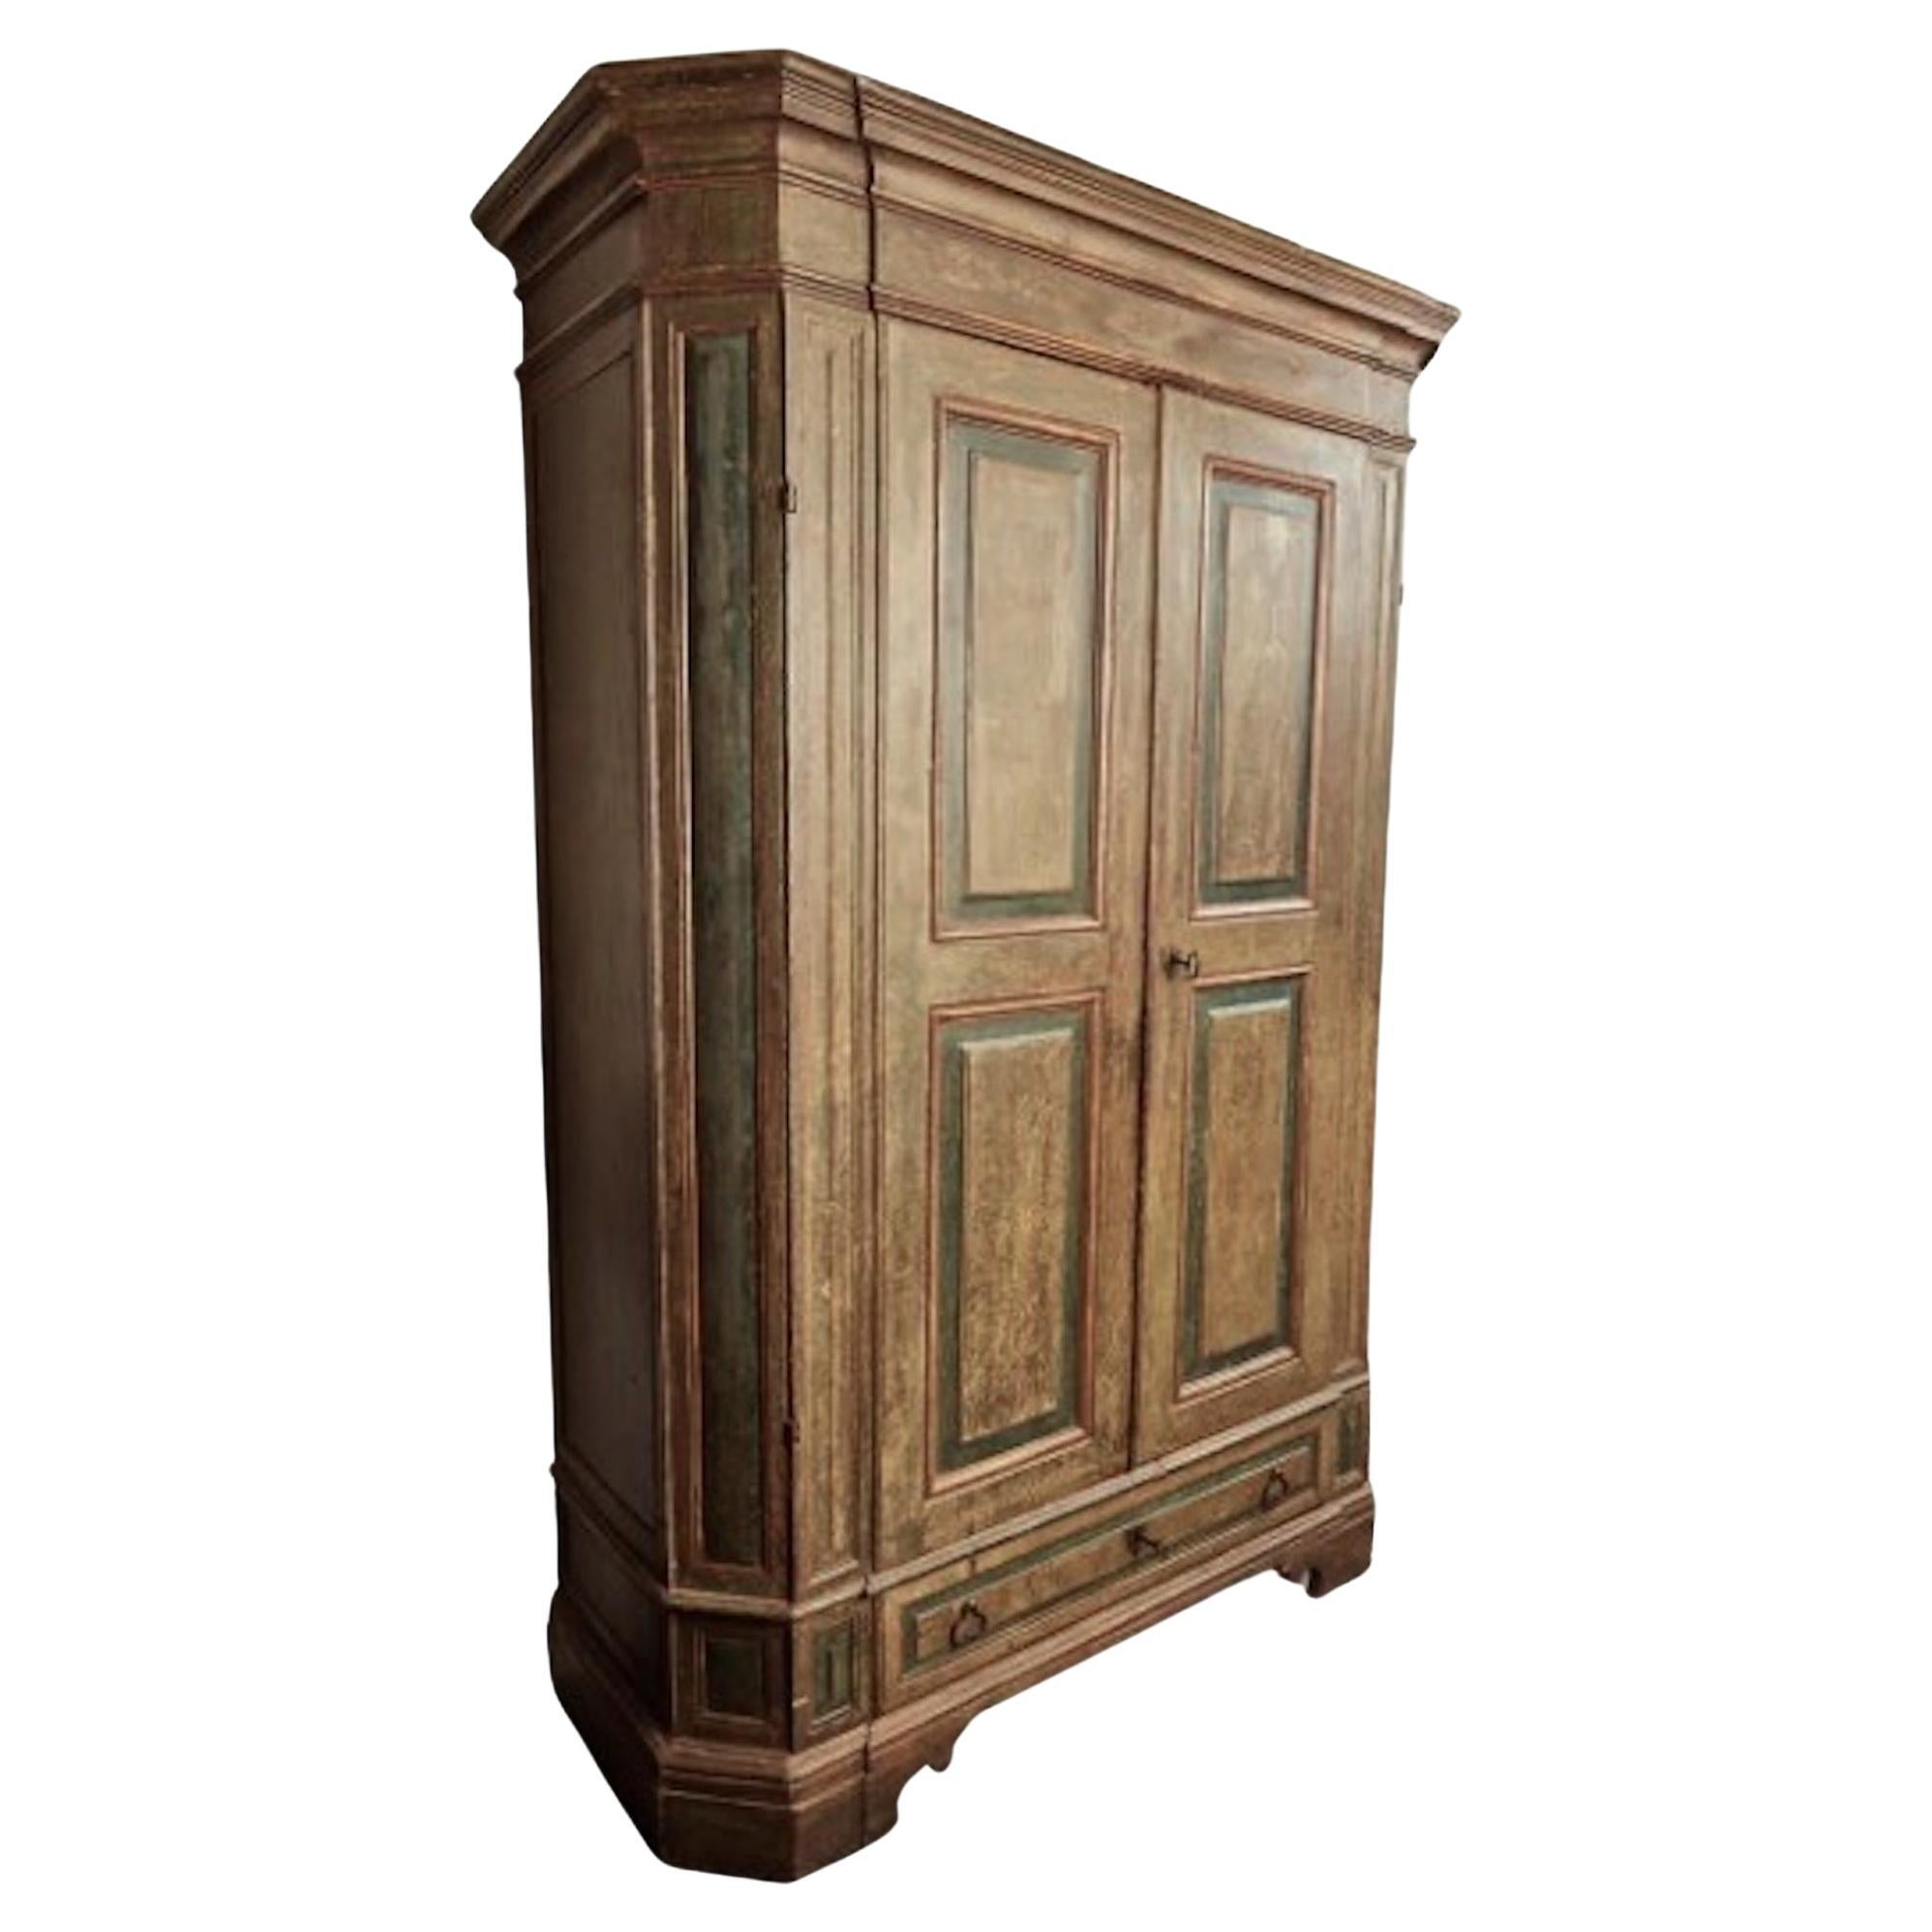 Antique, Painted Tuscan Armoire